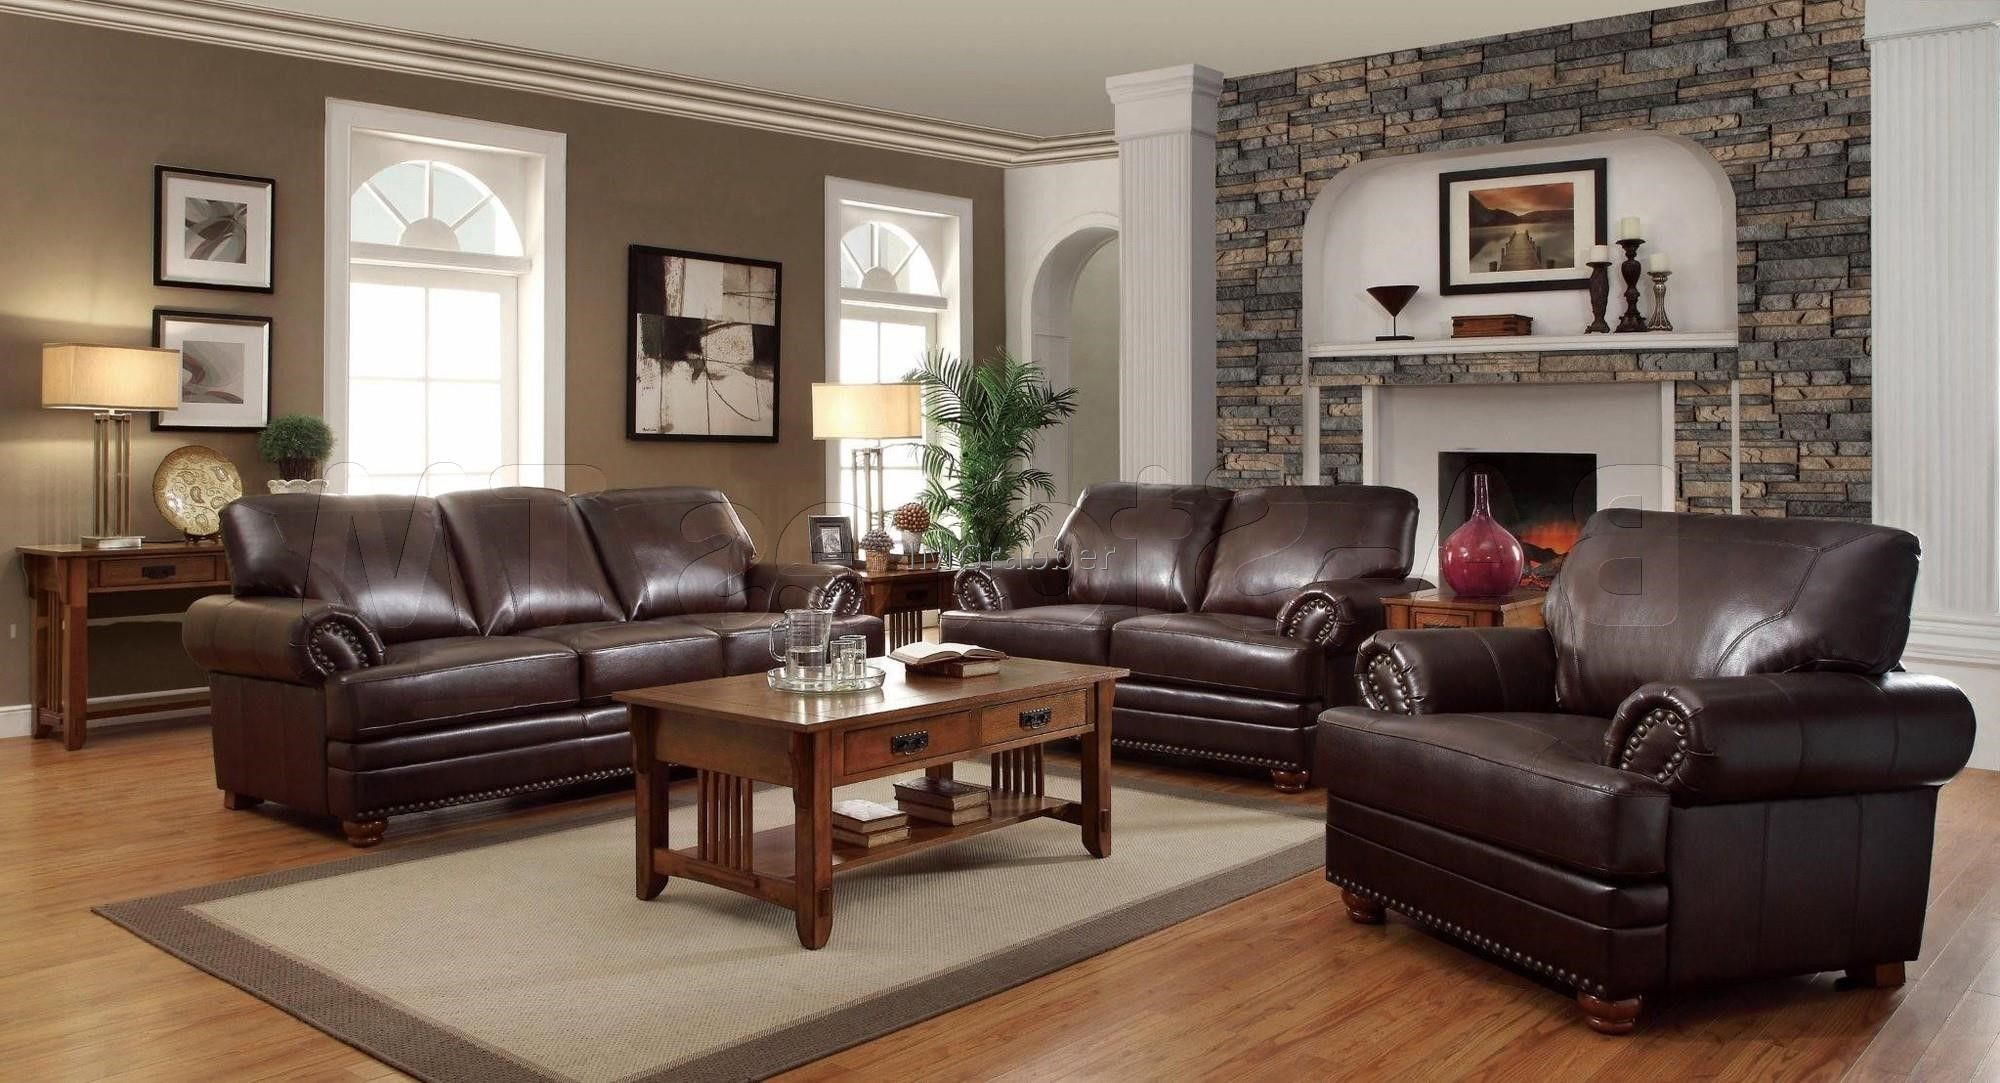 Living Room Decorating Ideas With Brown Leather Sectional - Salon Decor ...